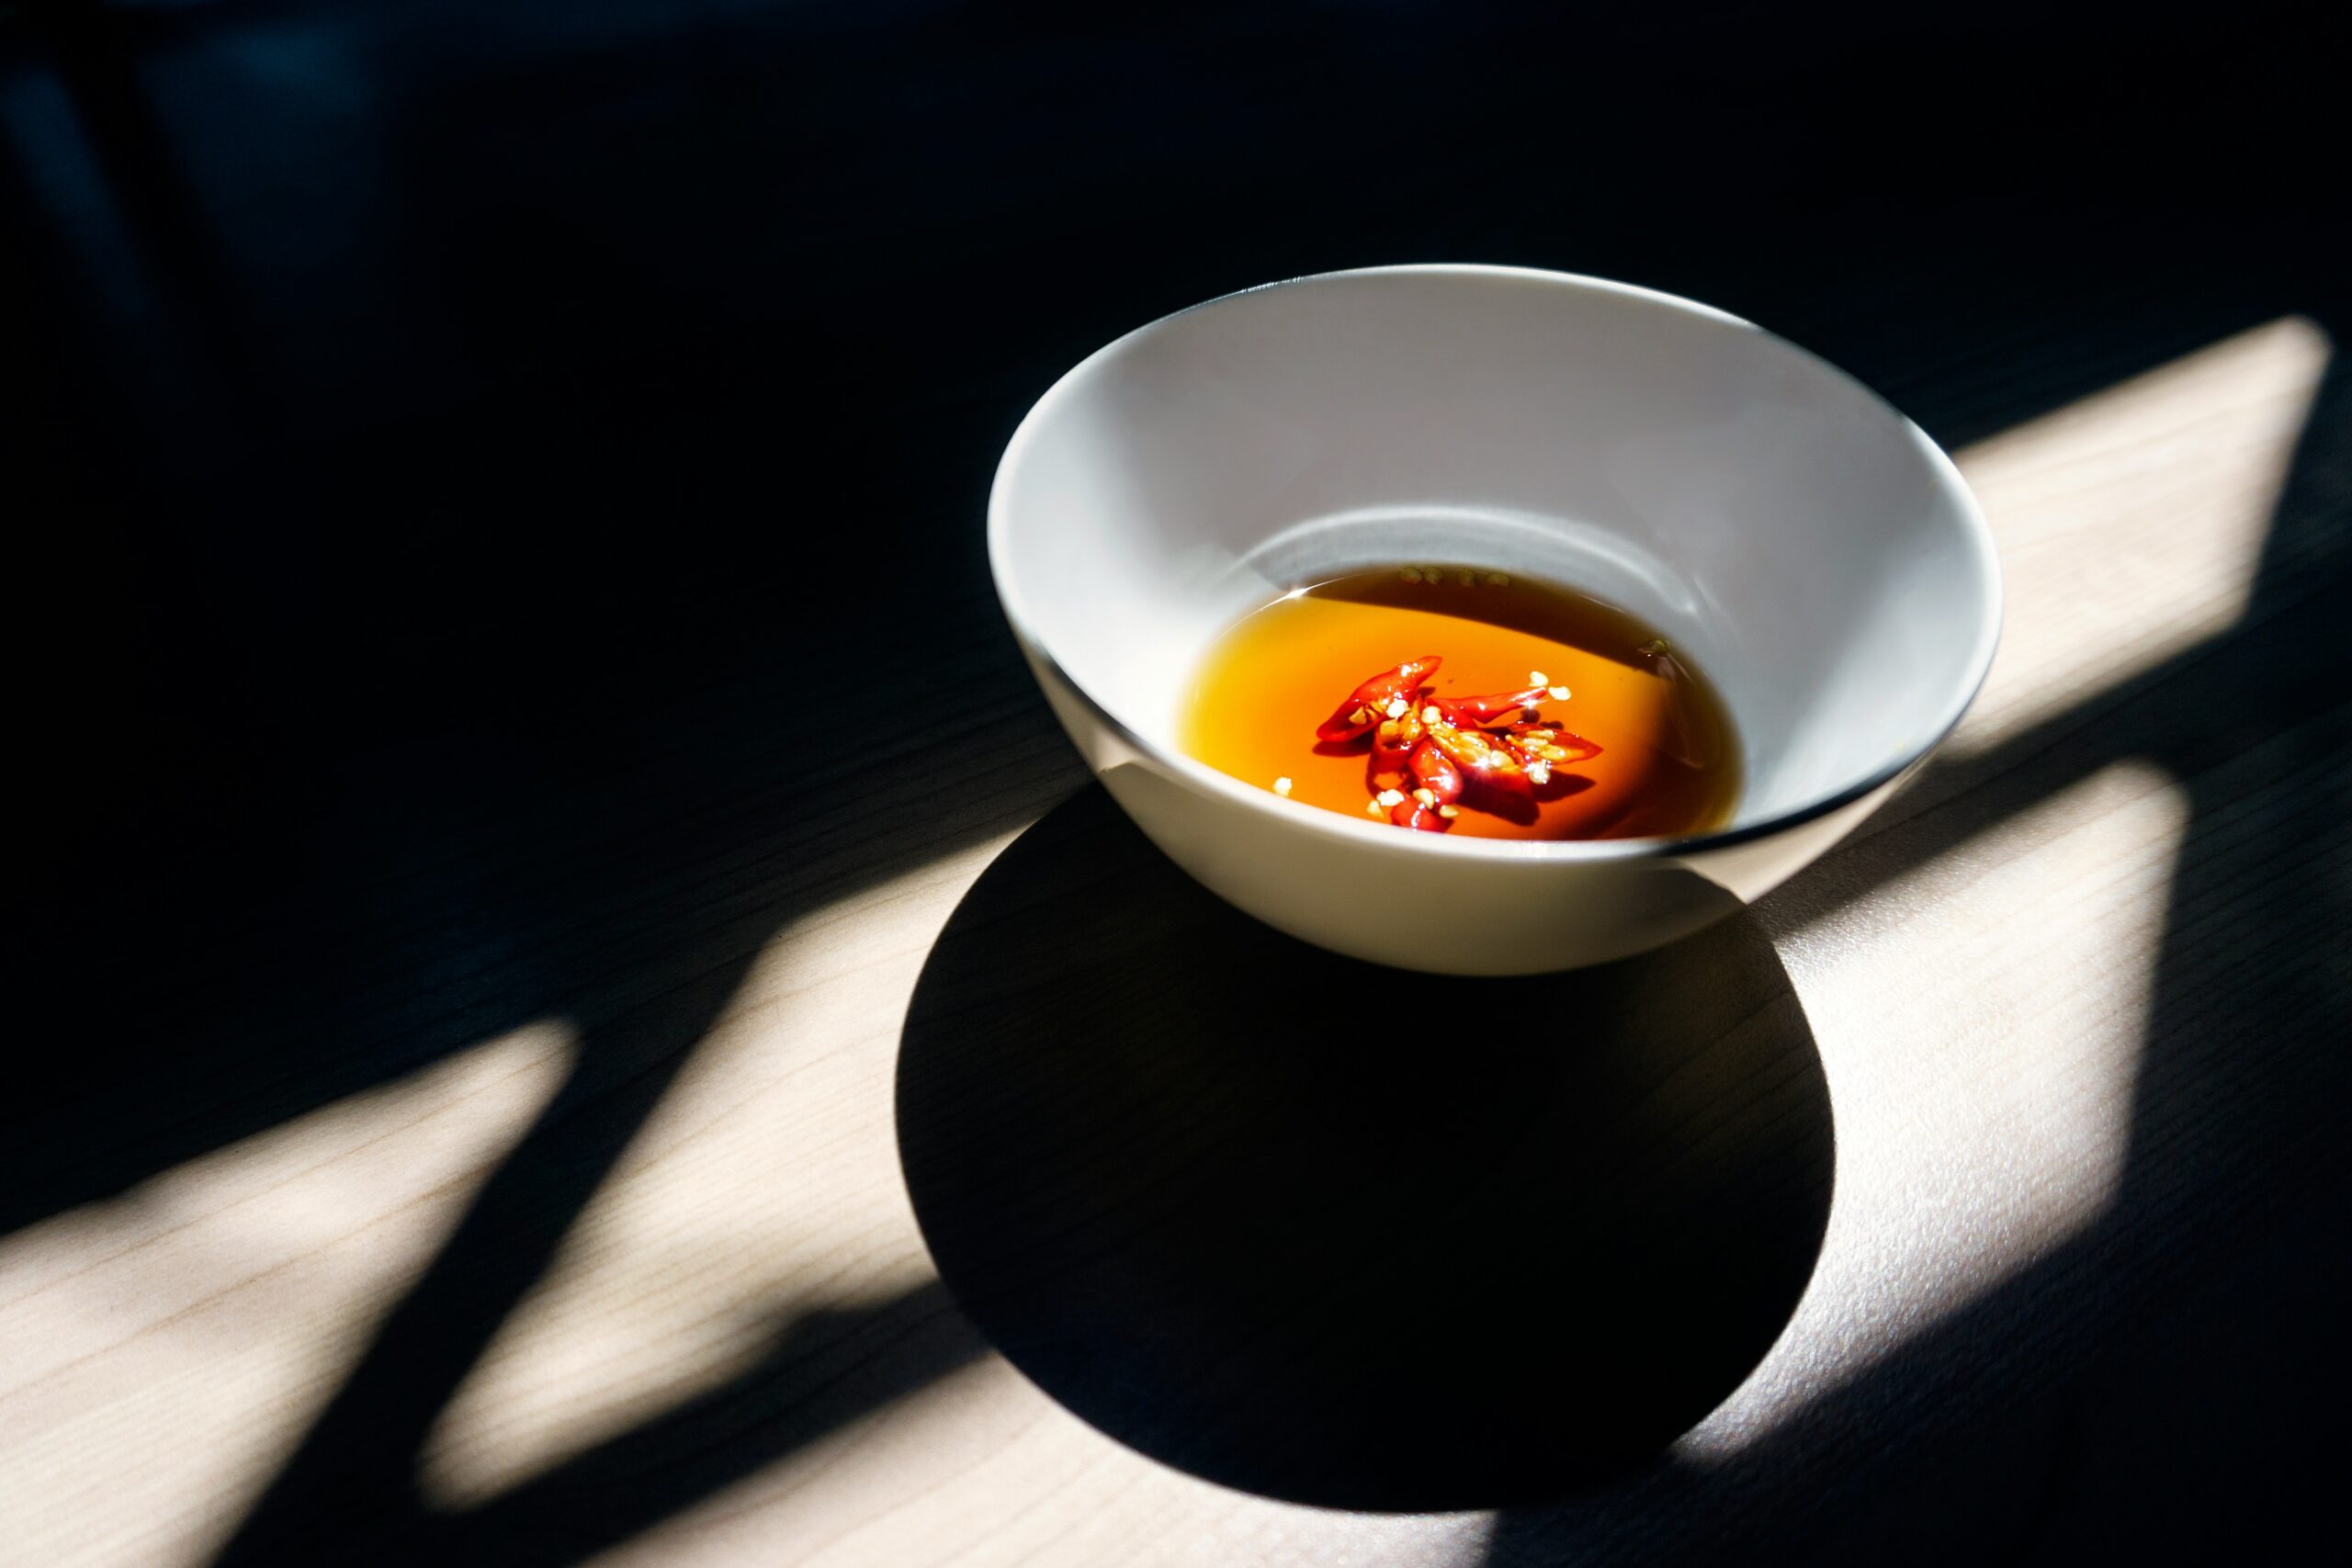 Fish sauce works well as a substitute for soy sauce. Pictured: Fish sauce in a bowl